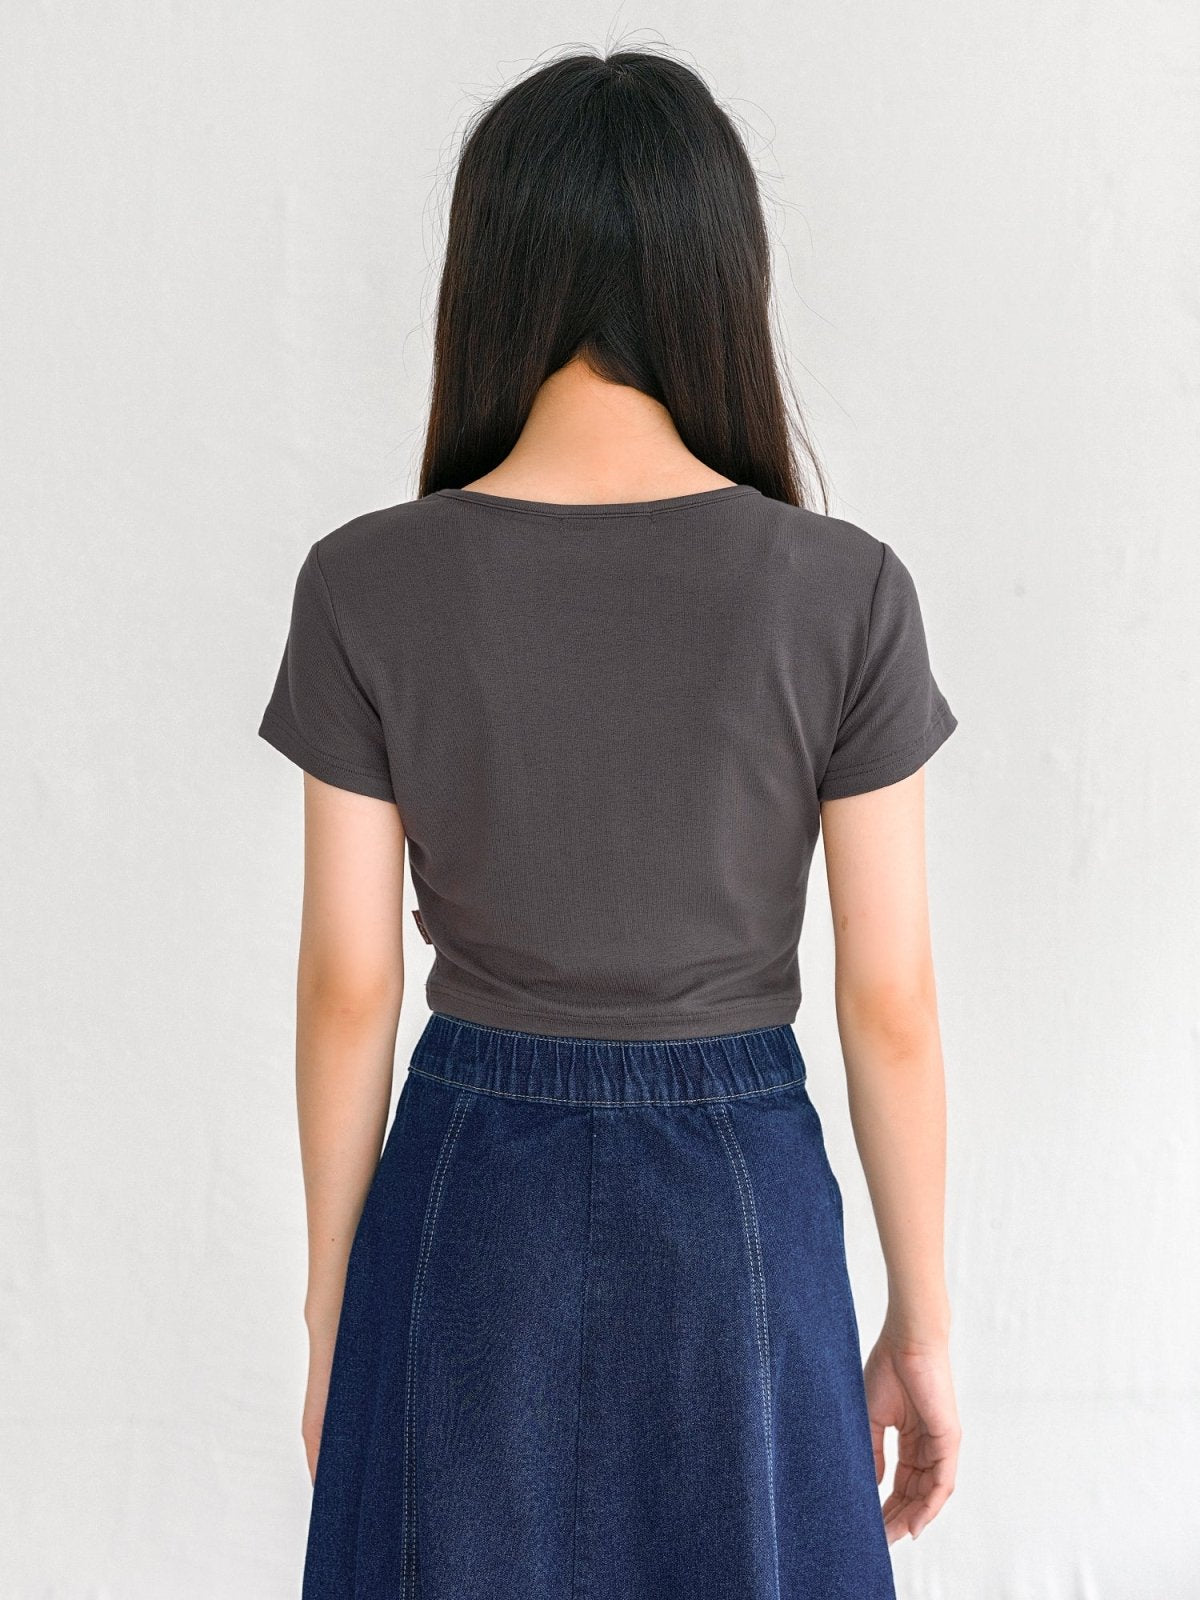 Everyday Stretchy Crop Tee (7 Colours) - DAG-DD0407-23CharcoalS - Charcoal - S - D'zage Designs